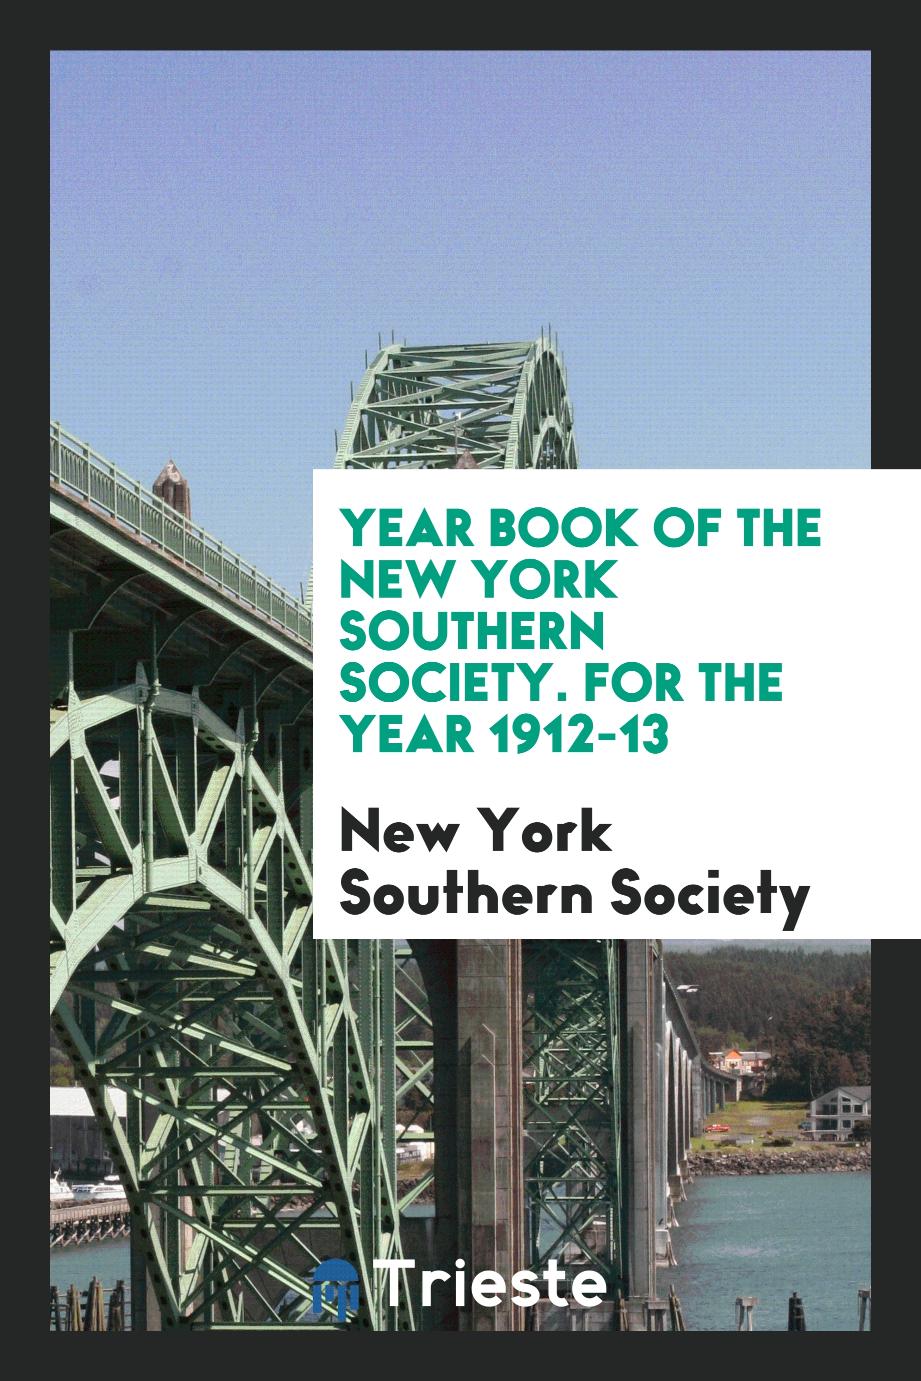 Year Book of the New York Southern Society. For the Year 1912-13